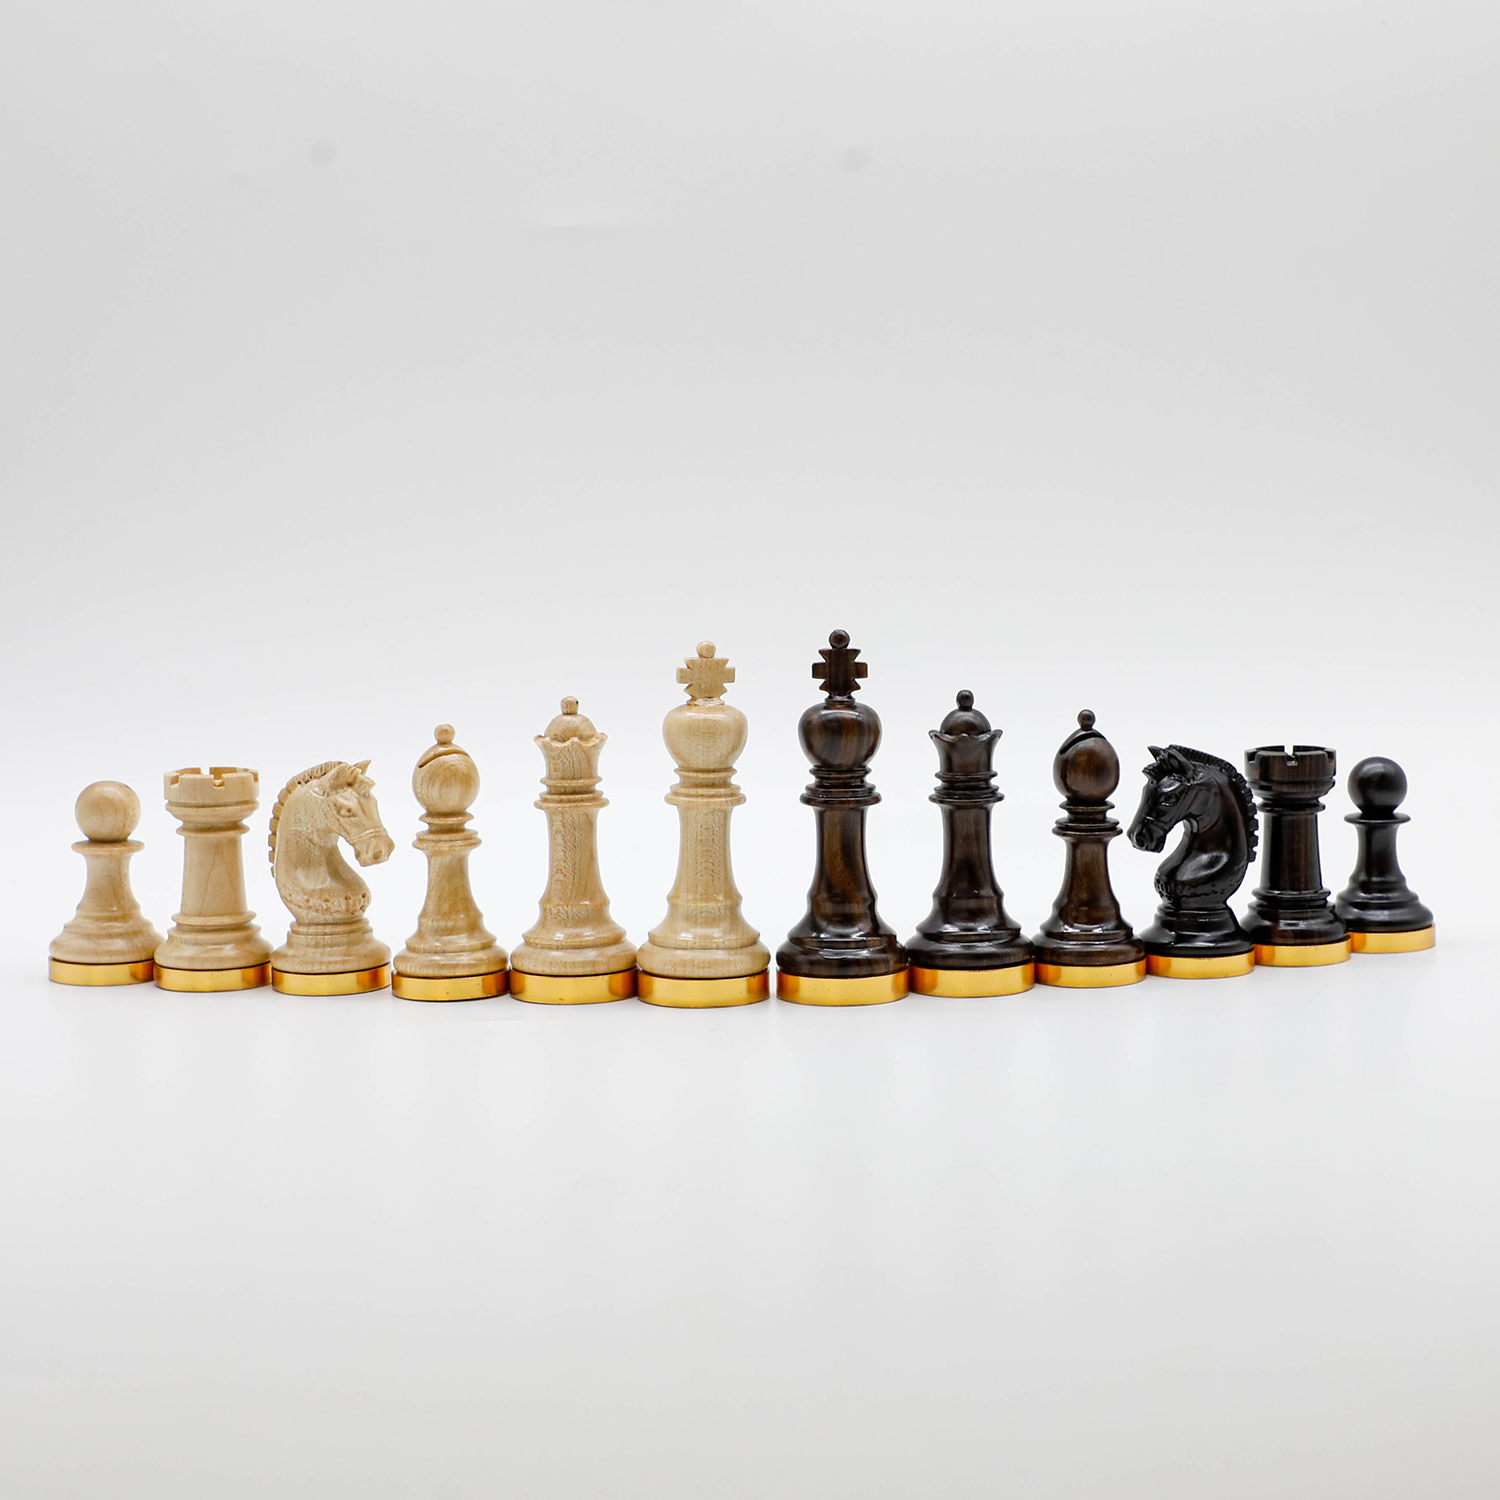 The Luxury Ebony & Maple Chess Pieces With Gold-Plated Brass Base